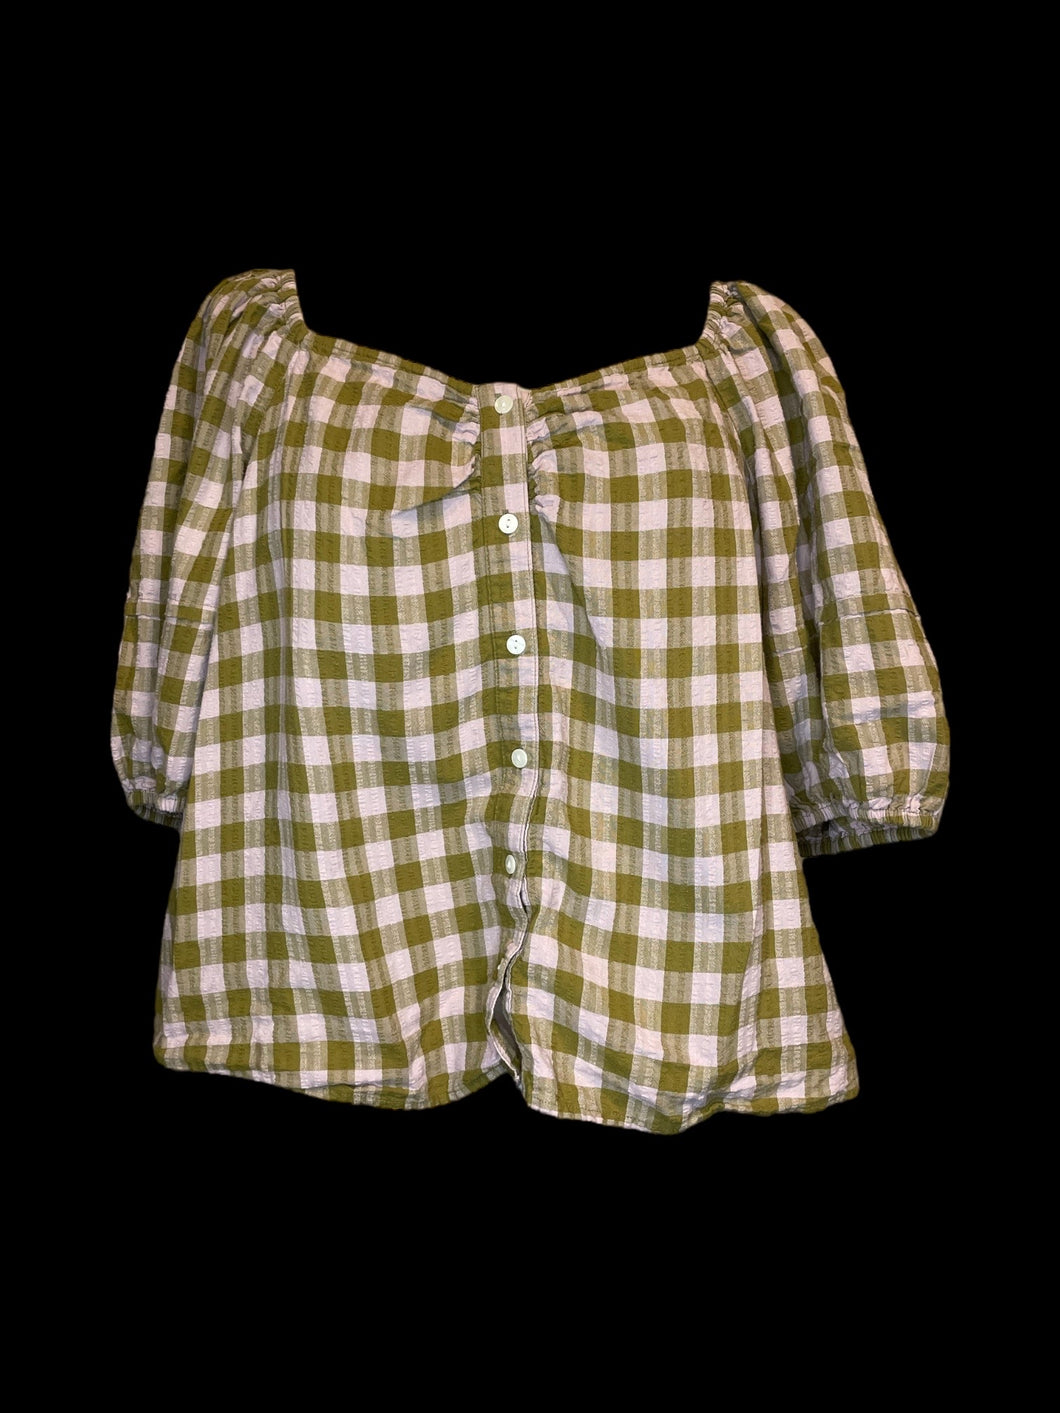 0X Olive green & pink gingham puff sleeve off the shoulder button down crop top w/ elastic details